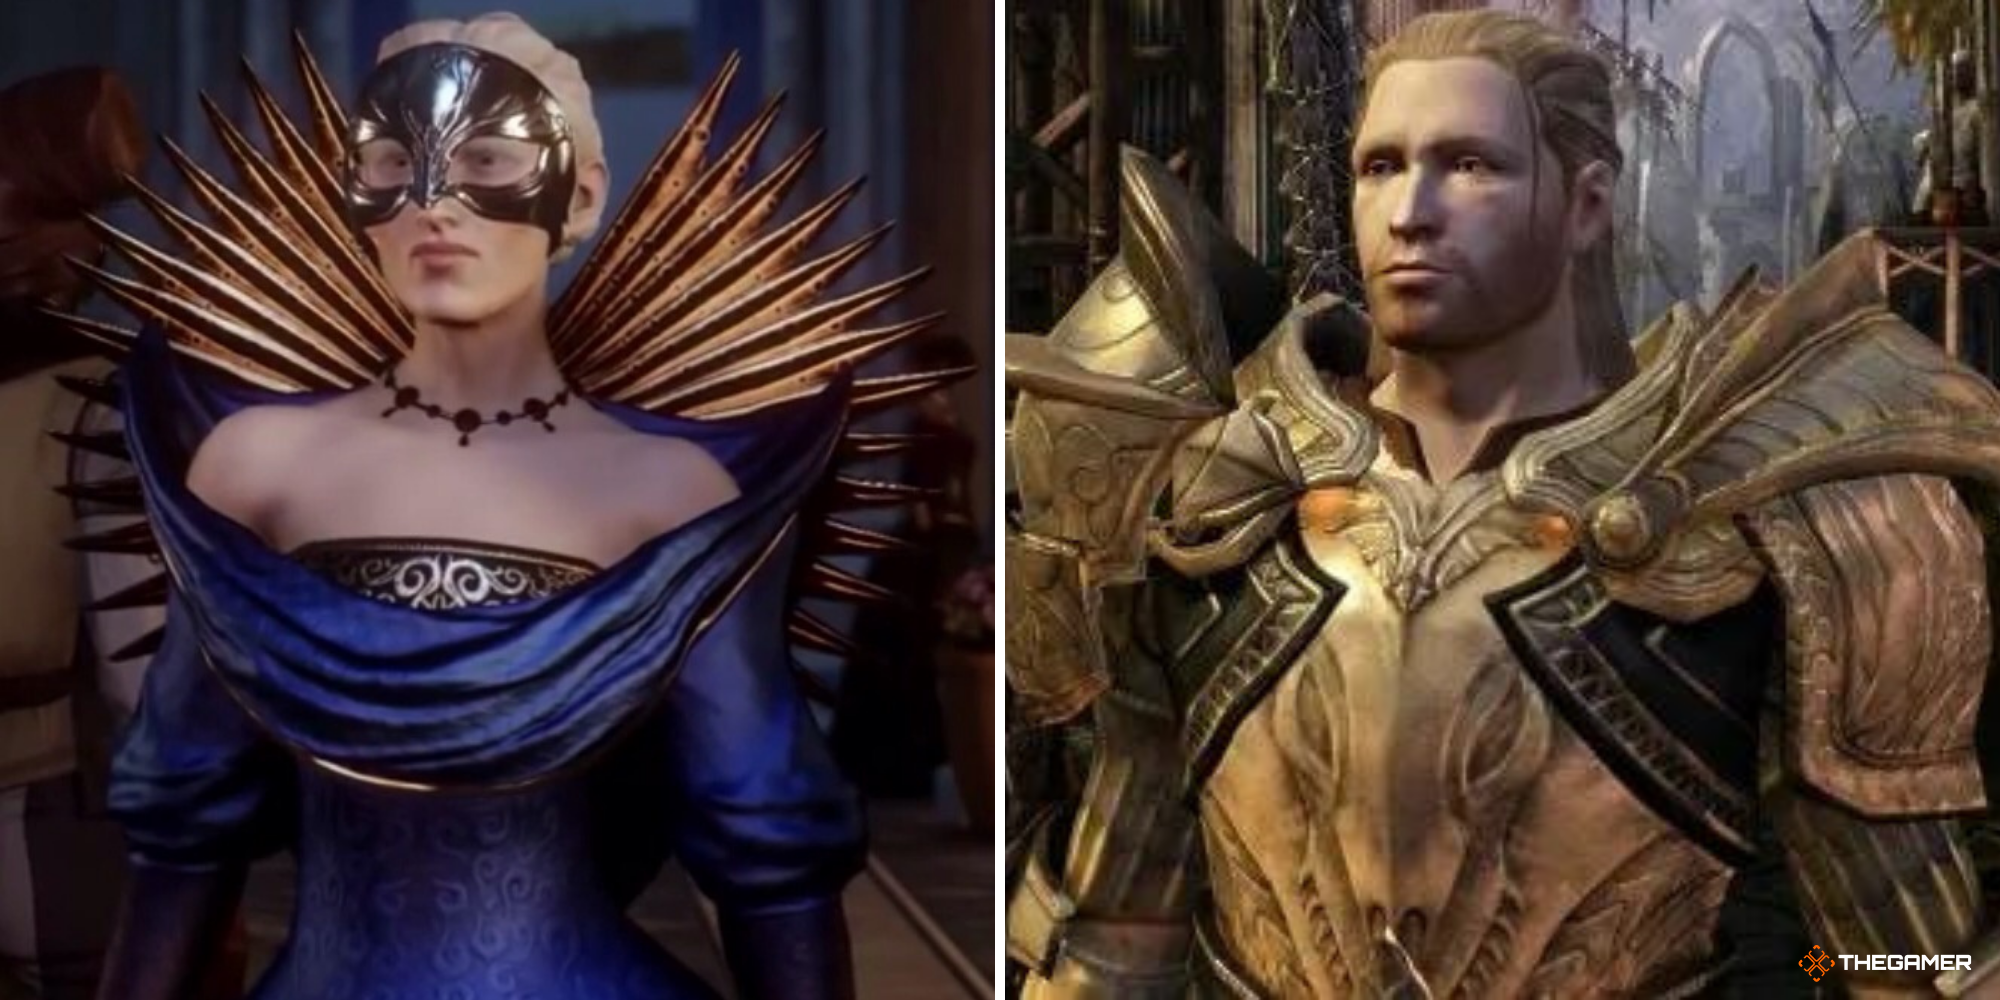 Dragon Age - King Cailan on right, Empress Celene on left